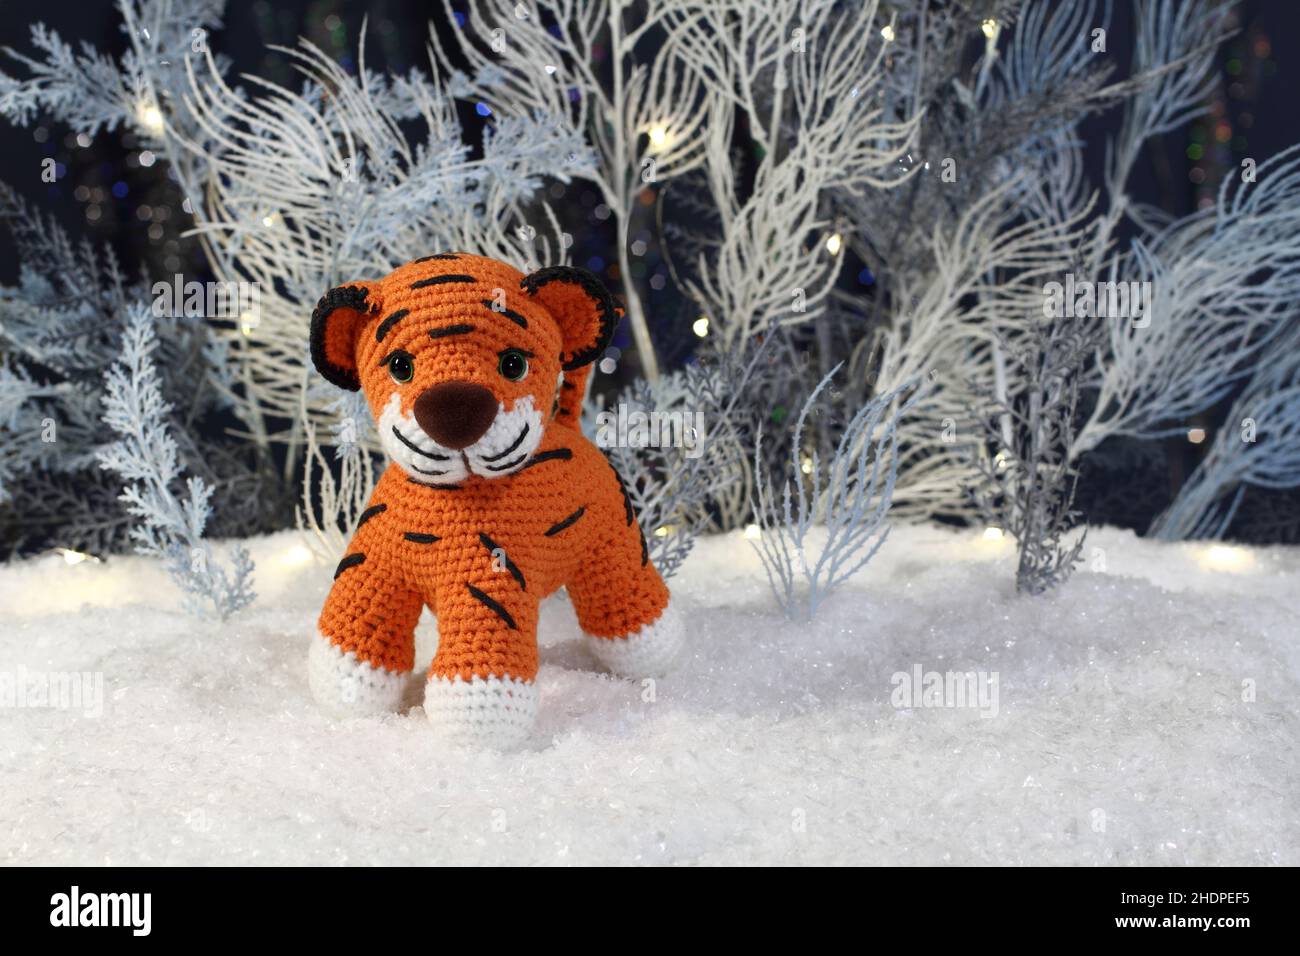 A knitted toy tiger stands on artificial snow and artificial blue and white trees with festive lights stand behind them against a dark blue background Stock Photo